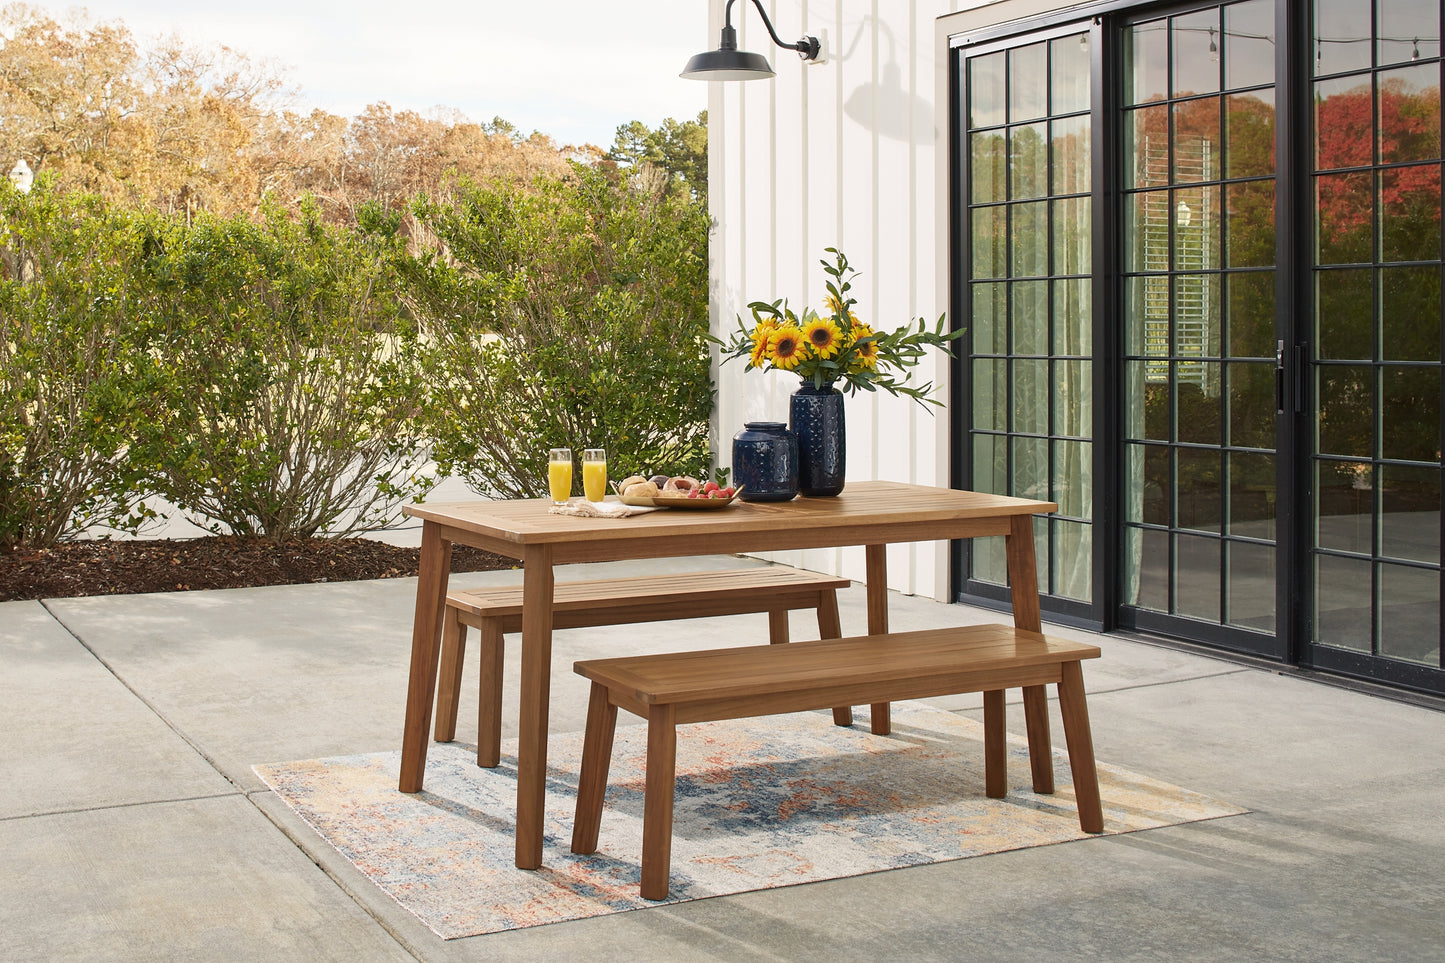 Ashley Express - Janiyah Outdoor Dining Table and 2 Benches